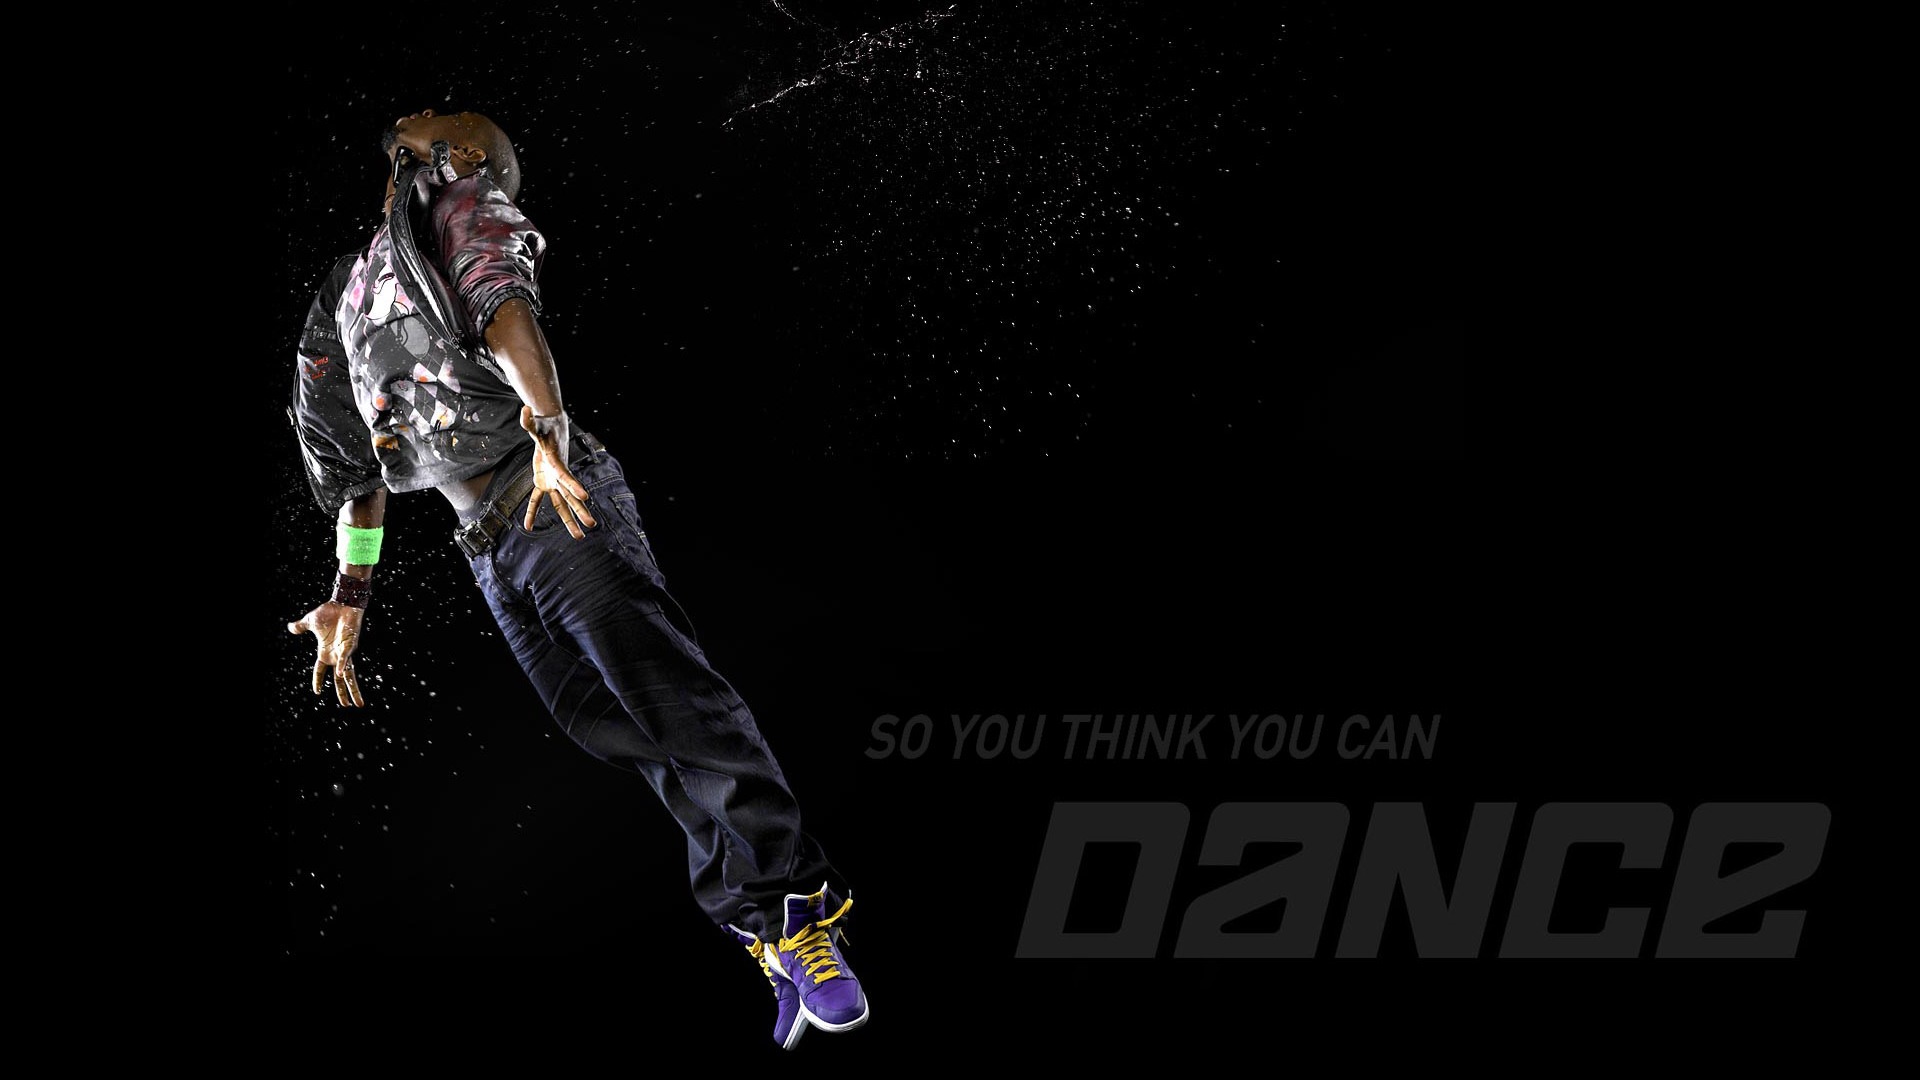 So You Think You Can Dance wallpaper (1) #10 - 1920x1080